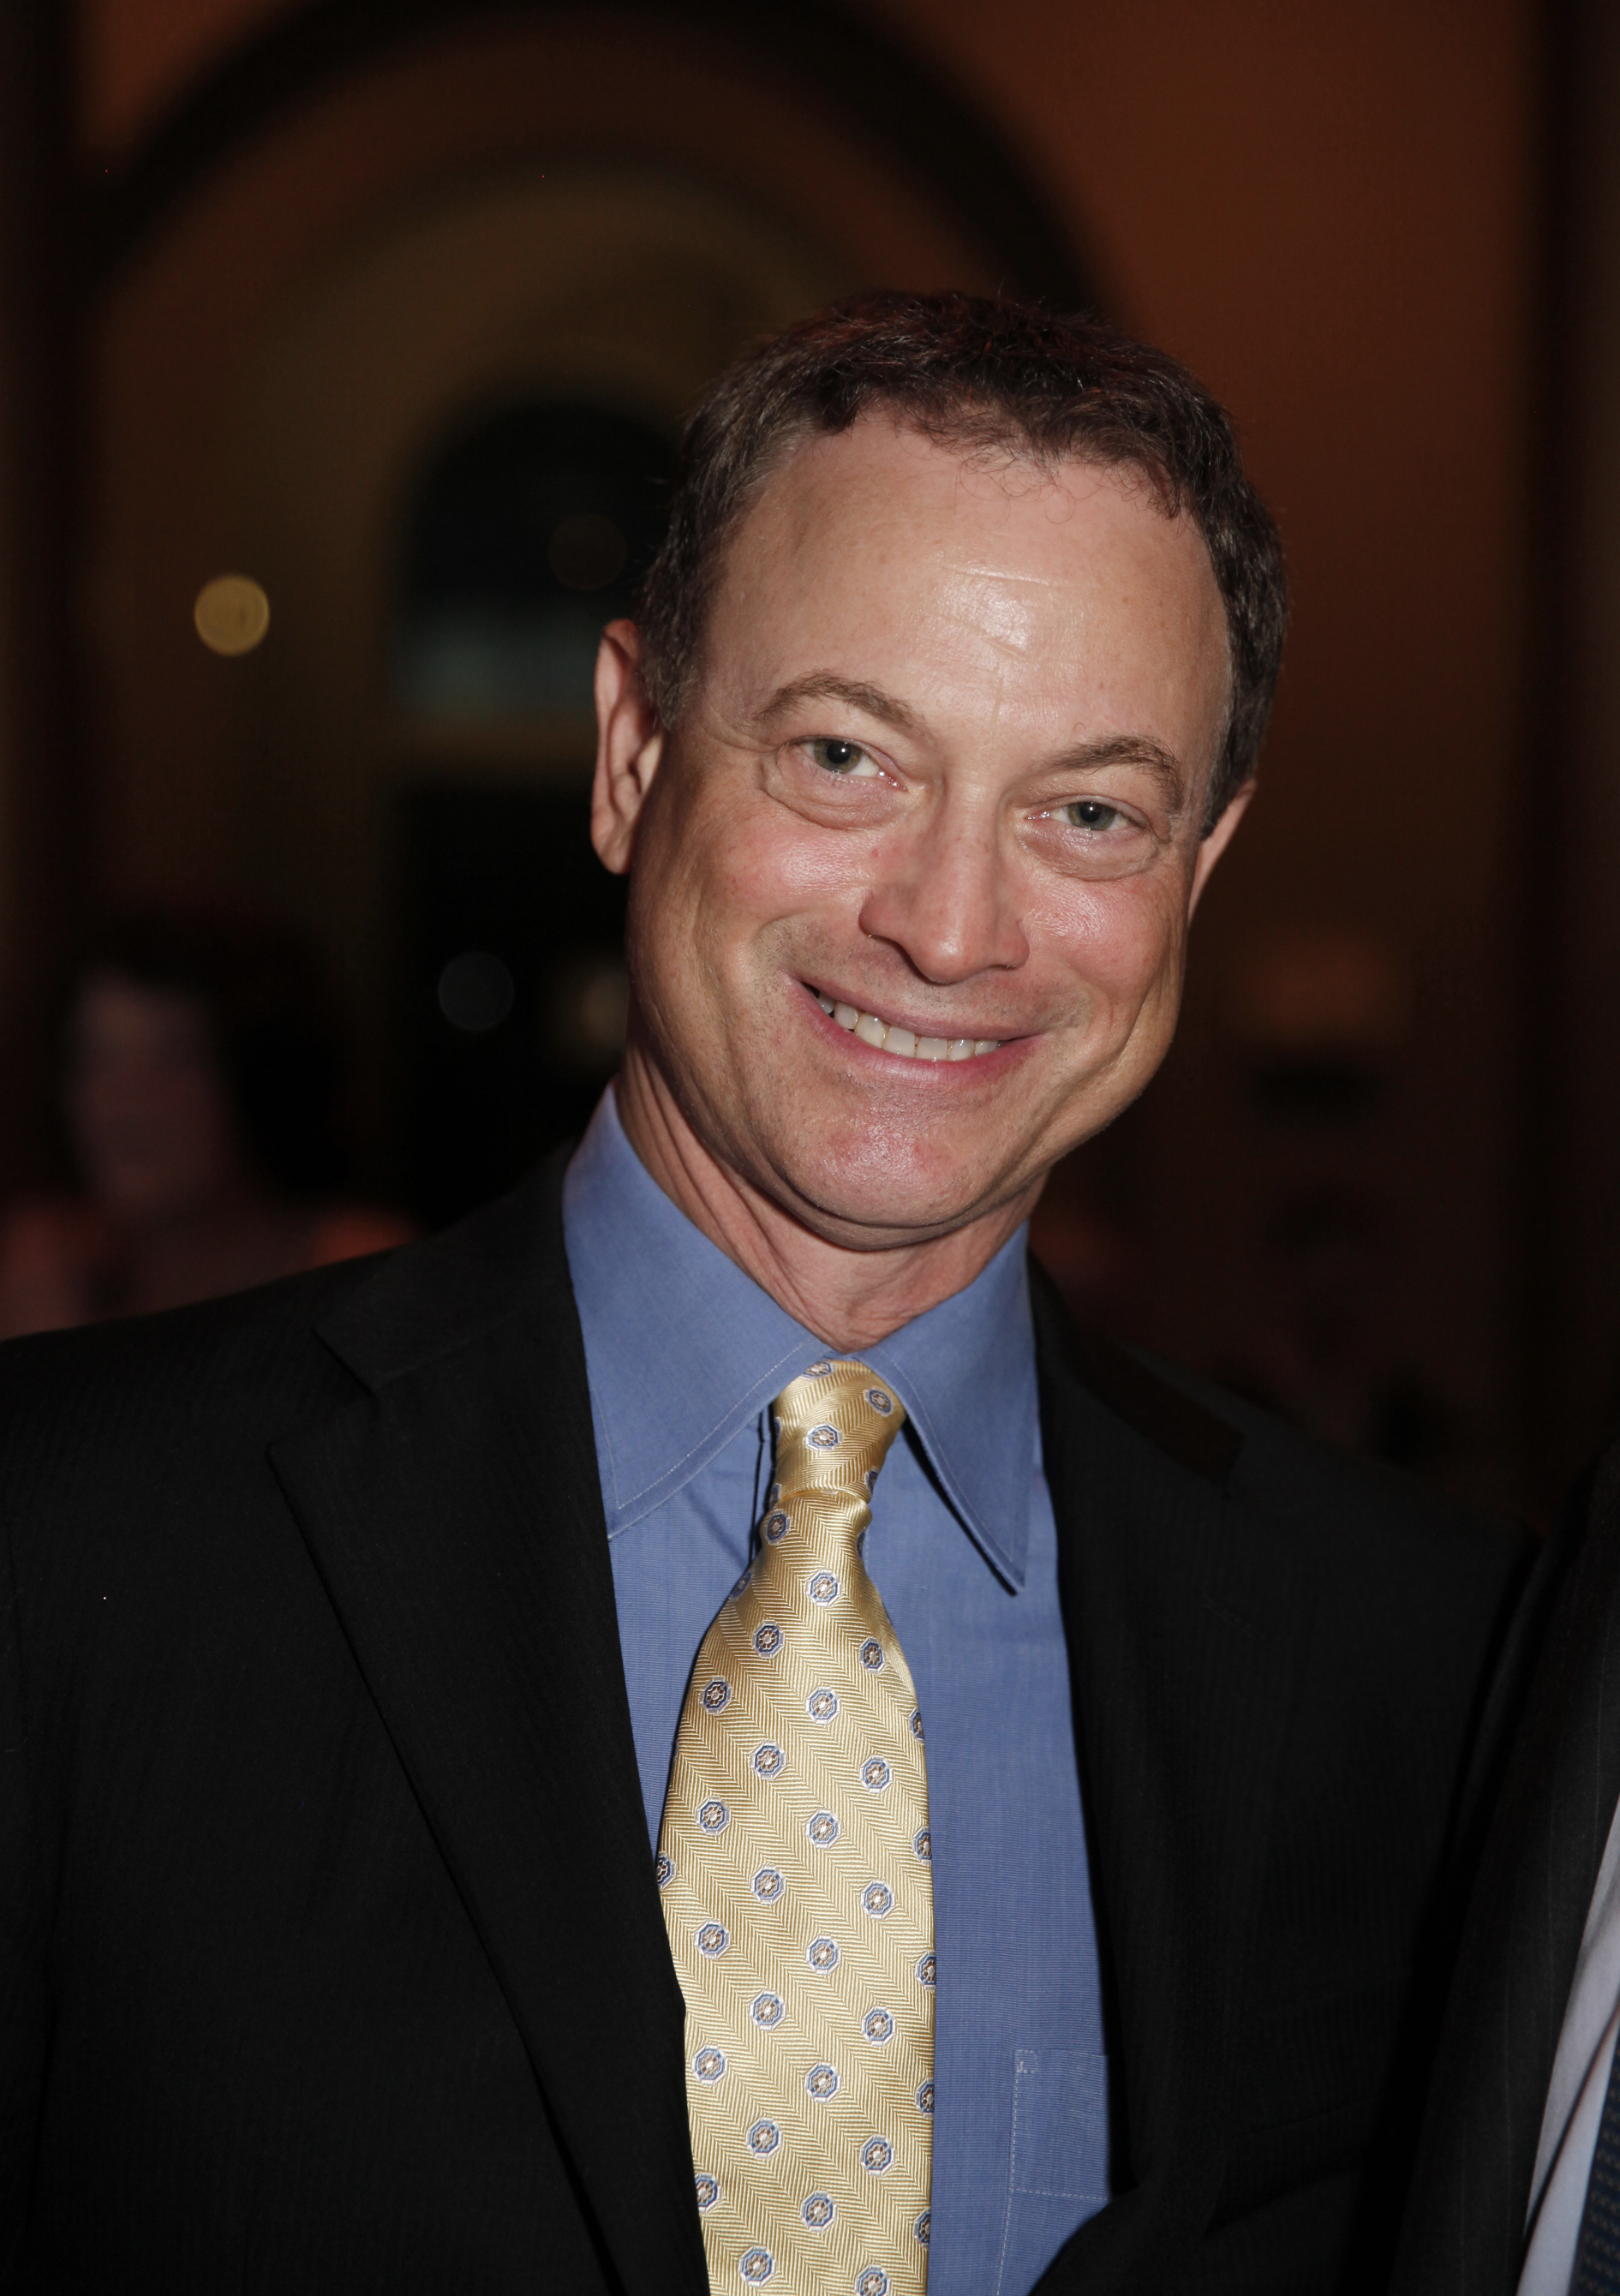 Gary Sinise attends the 25th Annual Sons Of Italy Foundation National Education And Leadership Awards Gala at the National Building Museum in Washington, DC, on May 23, 2013. | Source: Getty Images